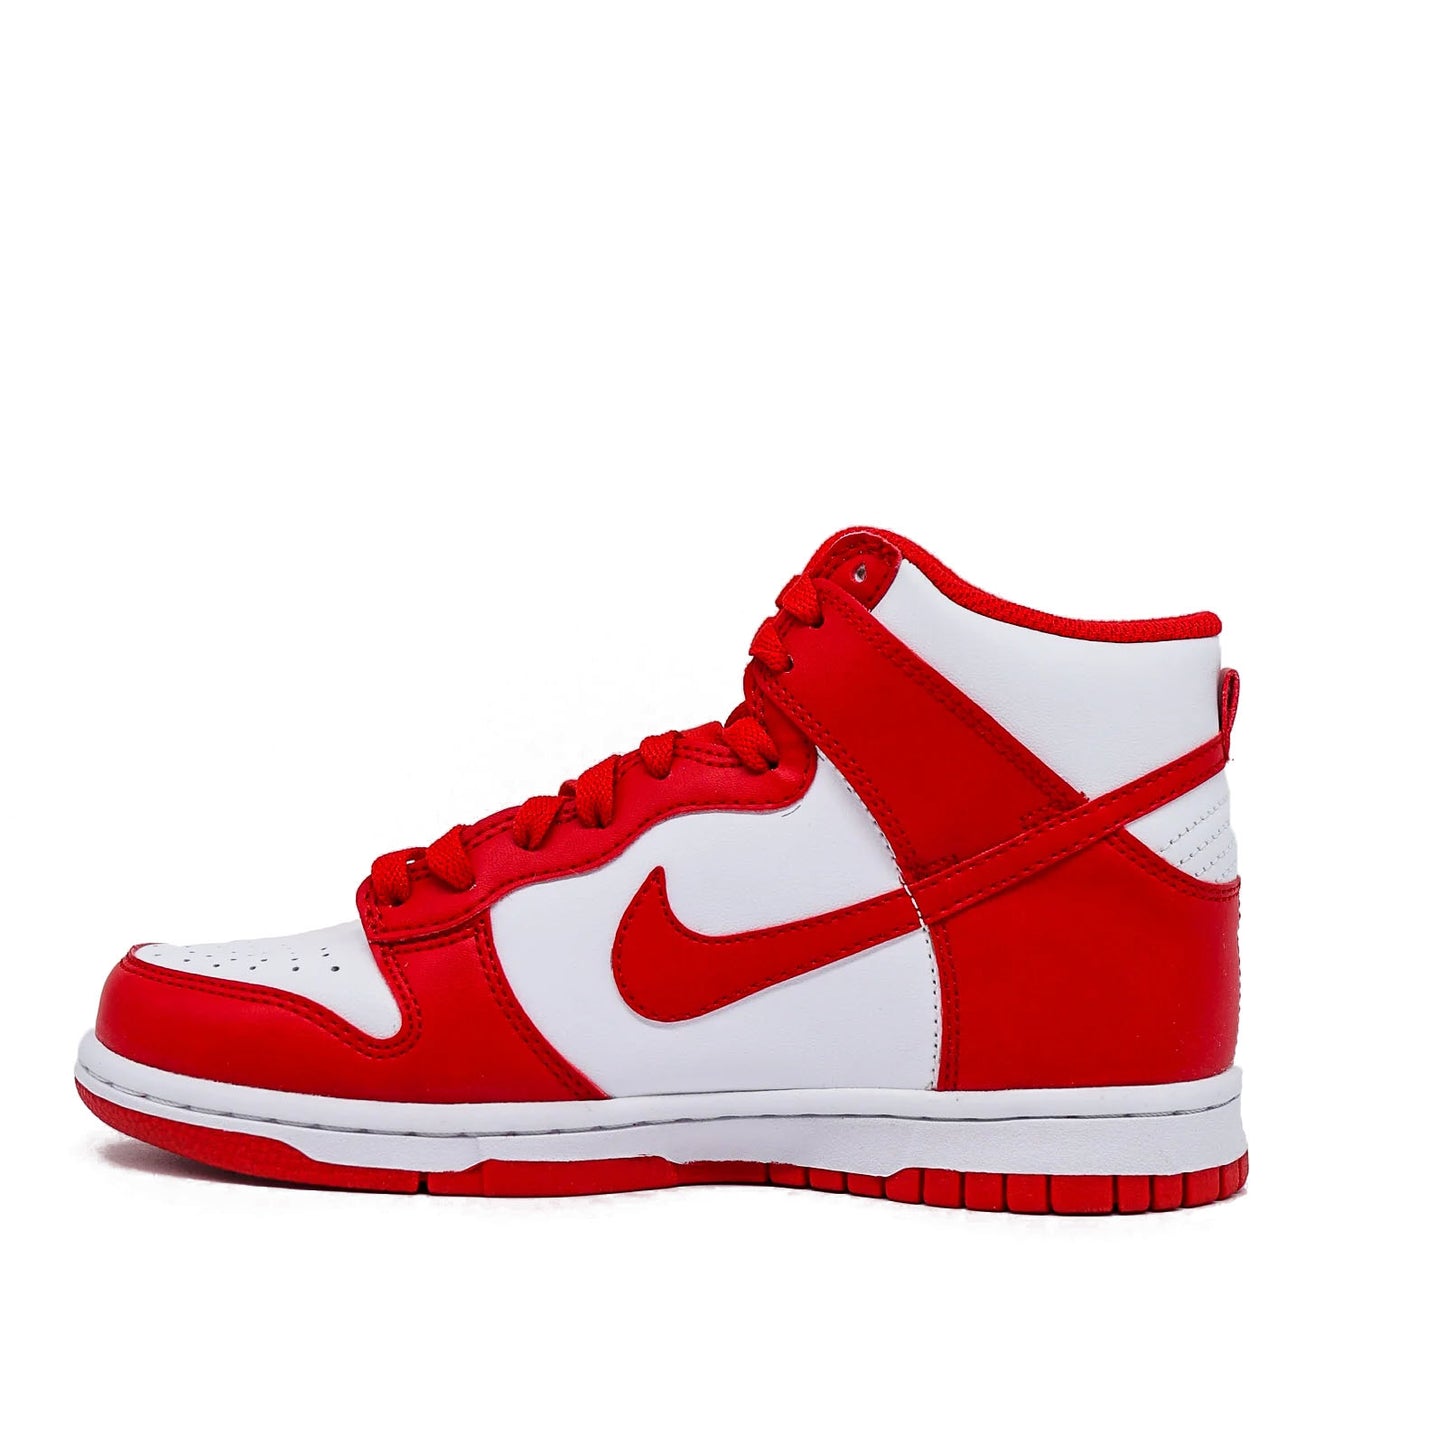 Nike Dunk High (PS), Championship Red